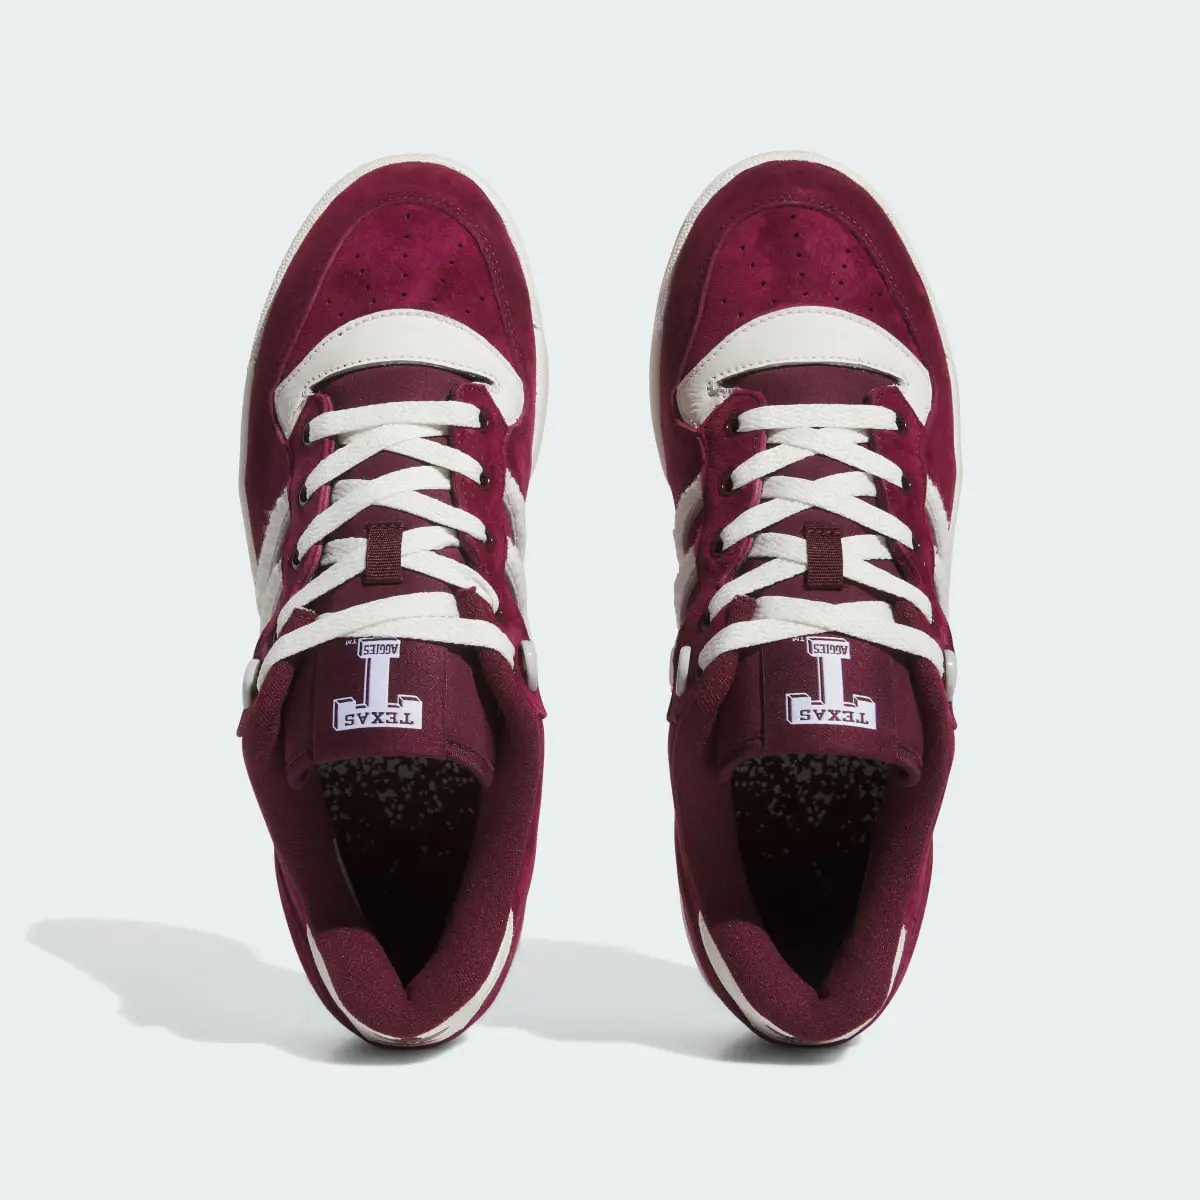 Adidas Texas A&M Rivalry Low Shoes. 3